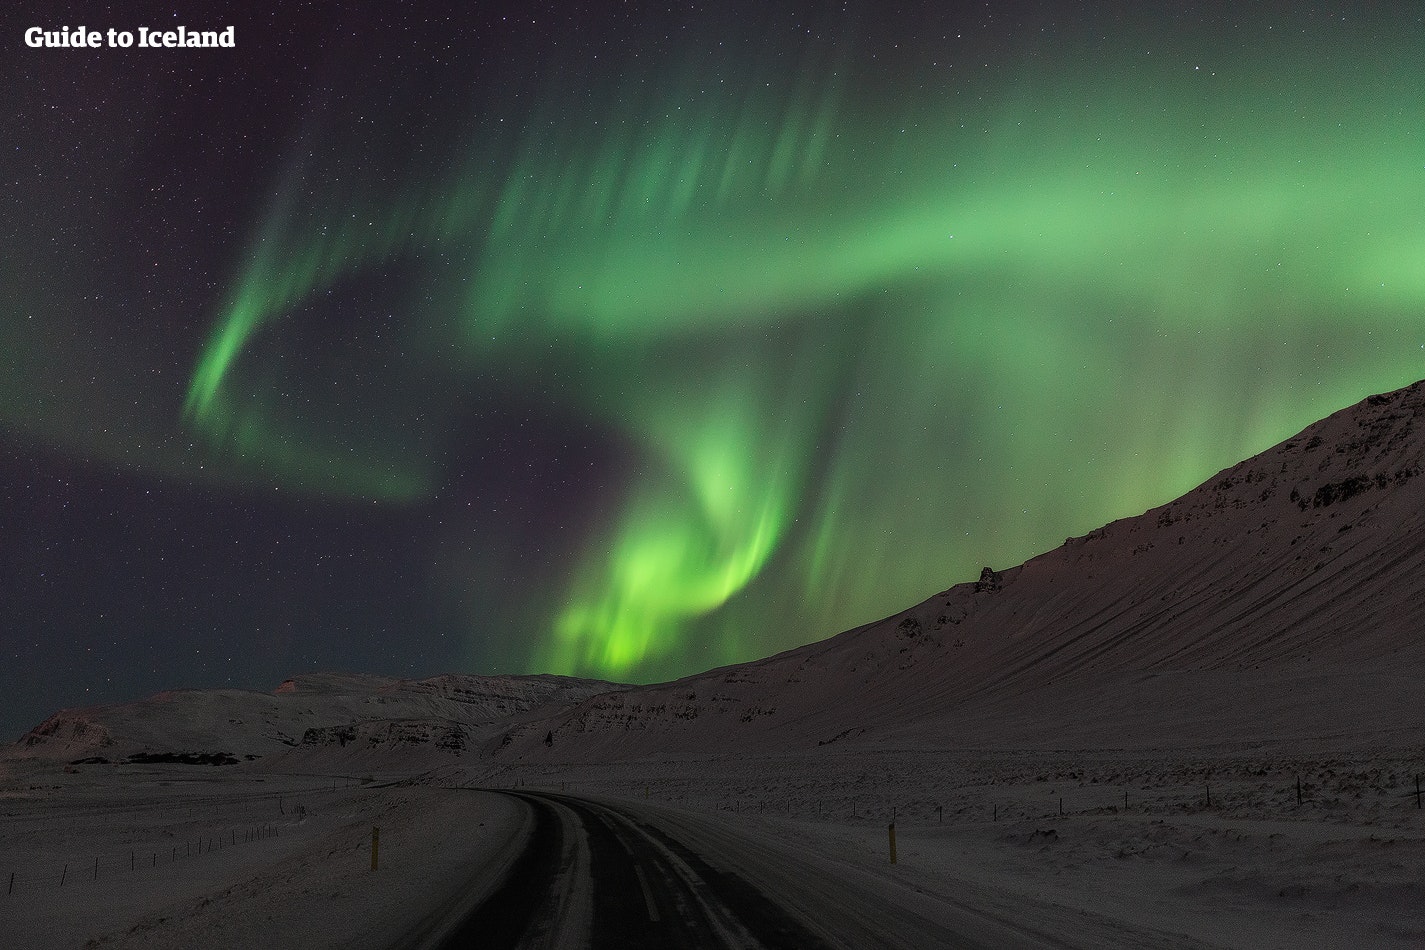 The aurora borealis reward those who search for them the hardest, and a self-drive tour provides endless opportunities for guests to hunt them.